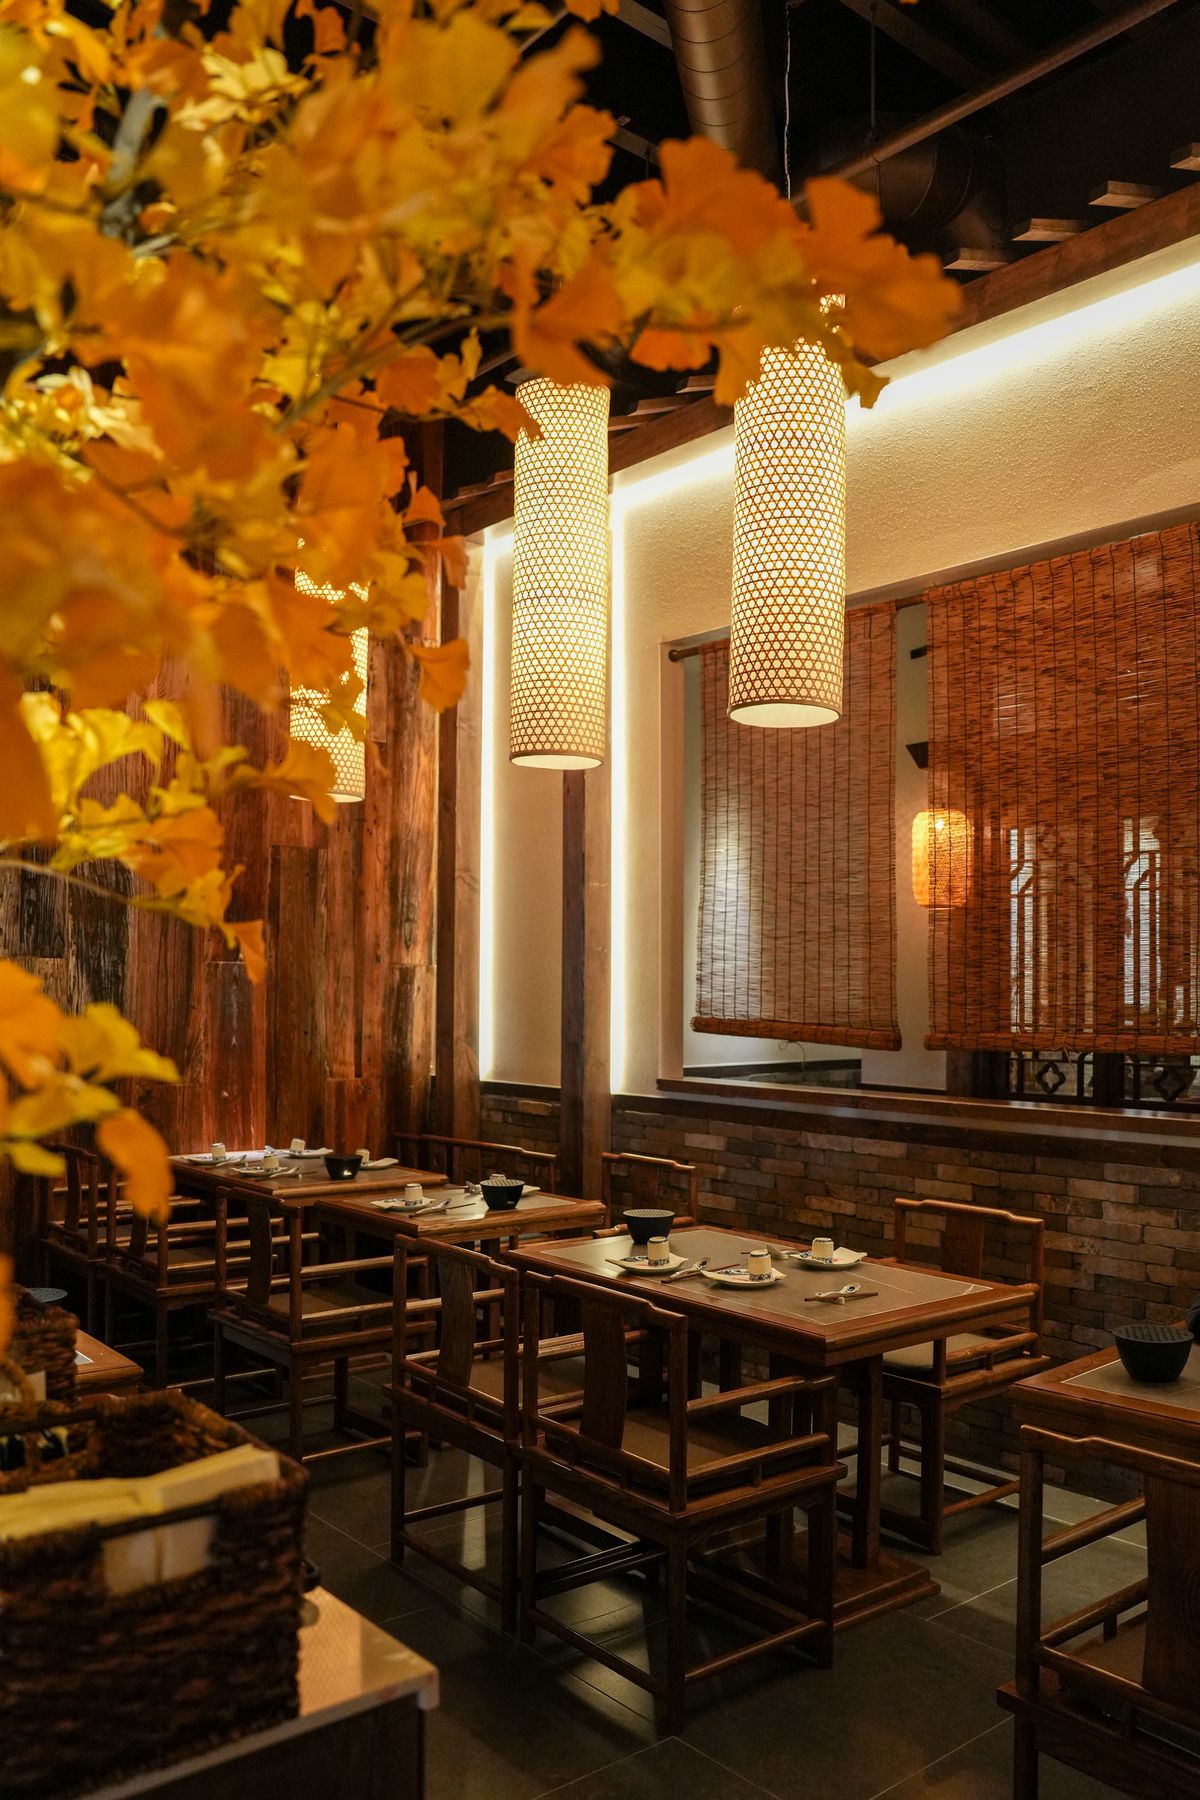 The interior of a Chinese restaurant with lanterns, wooden accents, and trees.